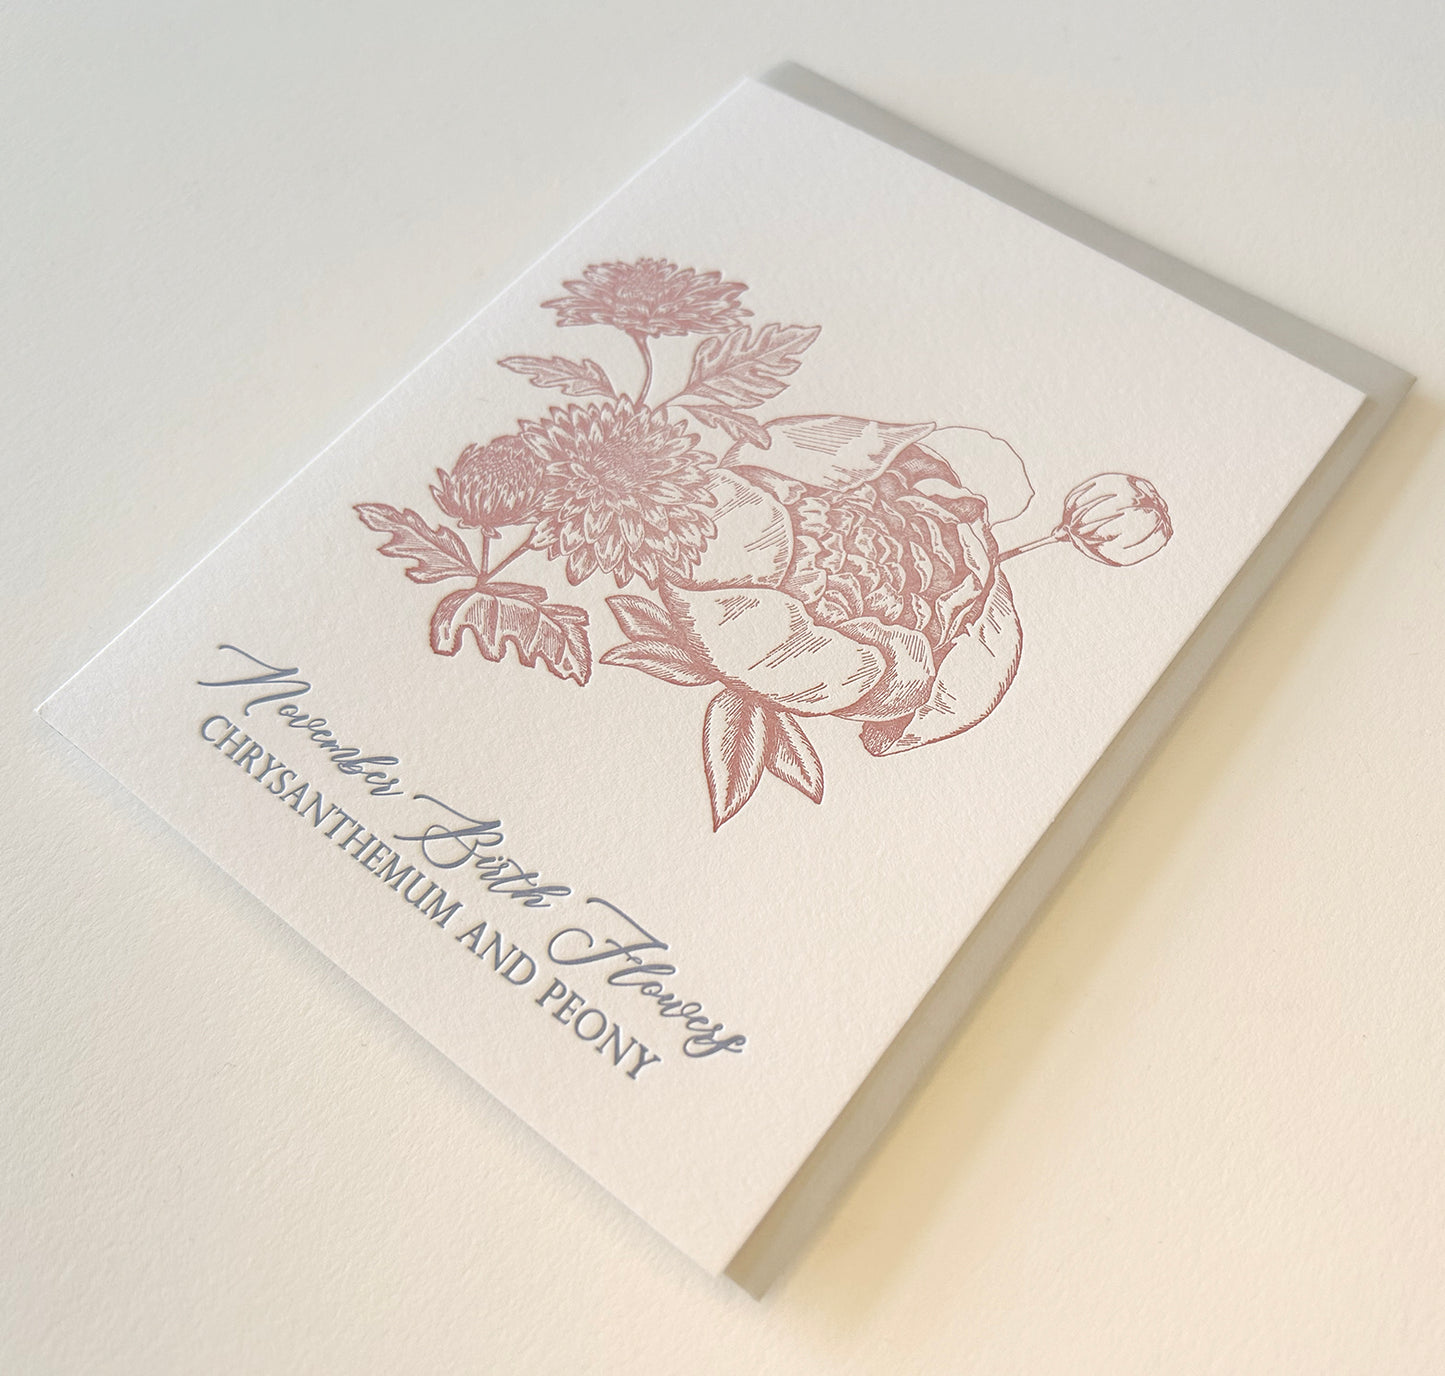 Letterpress birthday card with florals that says "November birth flowers chrysanthemum and peony" by Rust Belt Love